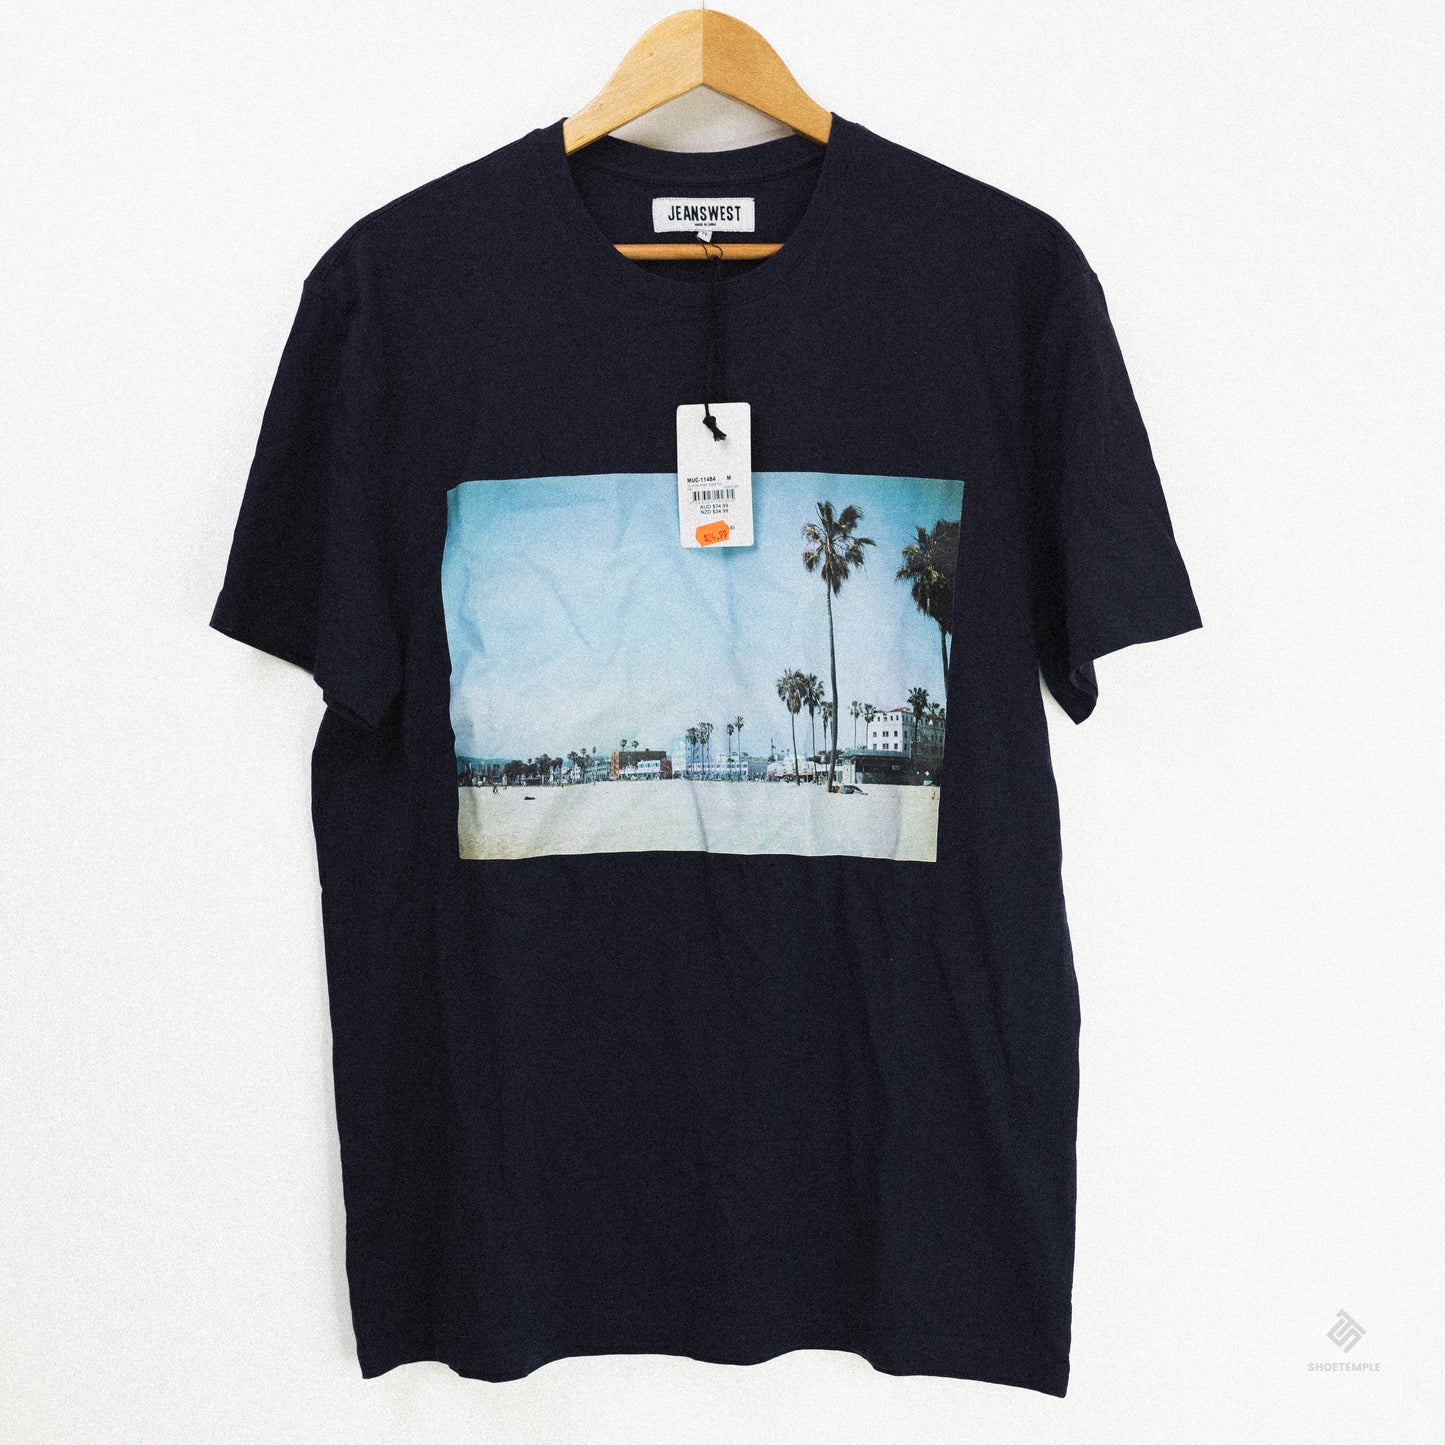 Jeans West Graphic Tee